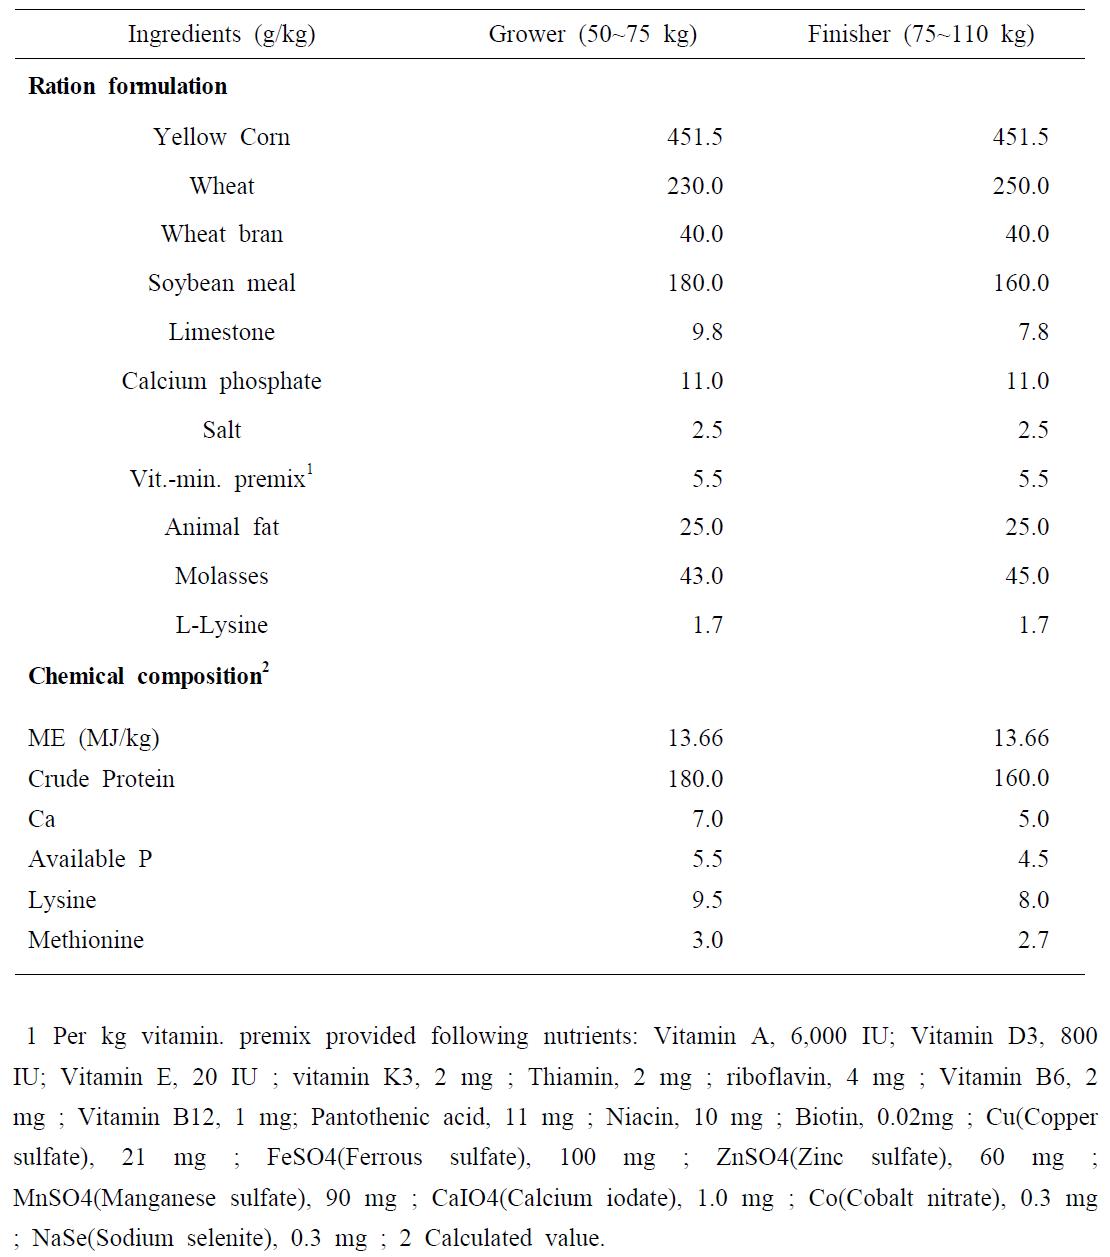 Ration formulation and chemical composition of basal diet for experimental pig.